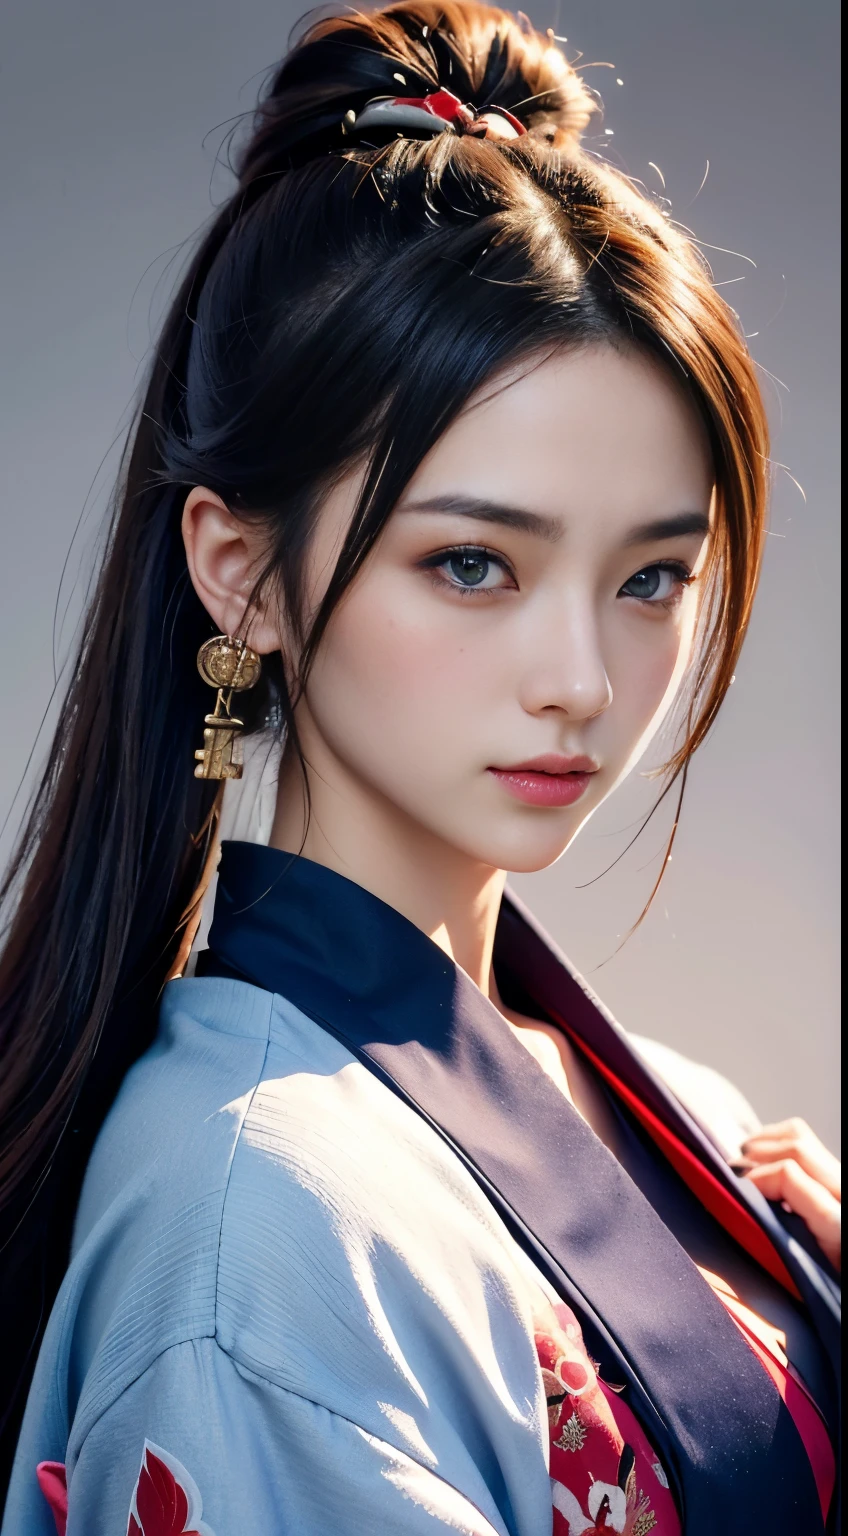 ((Best Quality, 8K, masutepiece:1.3)), 1girl in, Slim Abs Beauty:1.3, (casual hairstyle, Big breasts without leakage: 1.2), japanese kimono: 1.1, Super fine face, Delicate eyes, Double eyelids, Shyness, Dynamic Pose, Smile, Anime girl with gray brown hair and blue eyes holds a fan。, , The feminization of the key art of Xart Krenz, samurai detail art, female samurai portrait, Detailed Digital Anime Art, high detail official artwork, detailed anime art, Portrait of a female anime hero, woman samurai